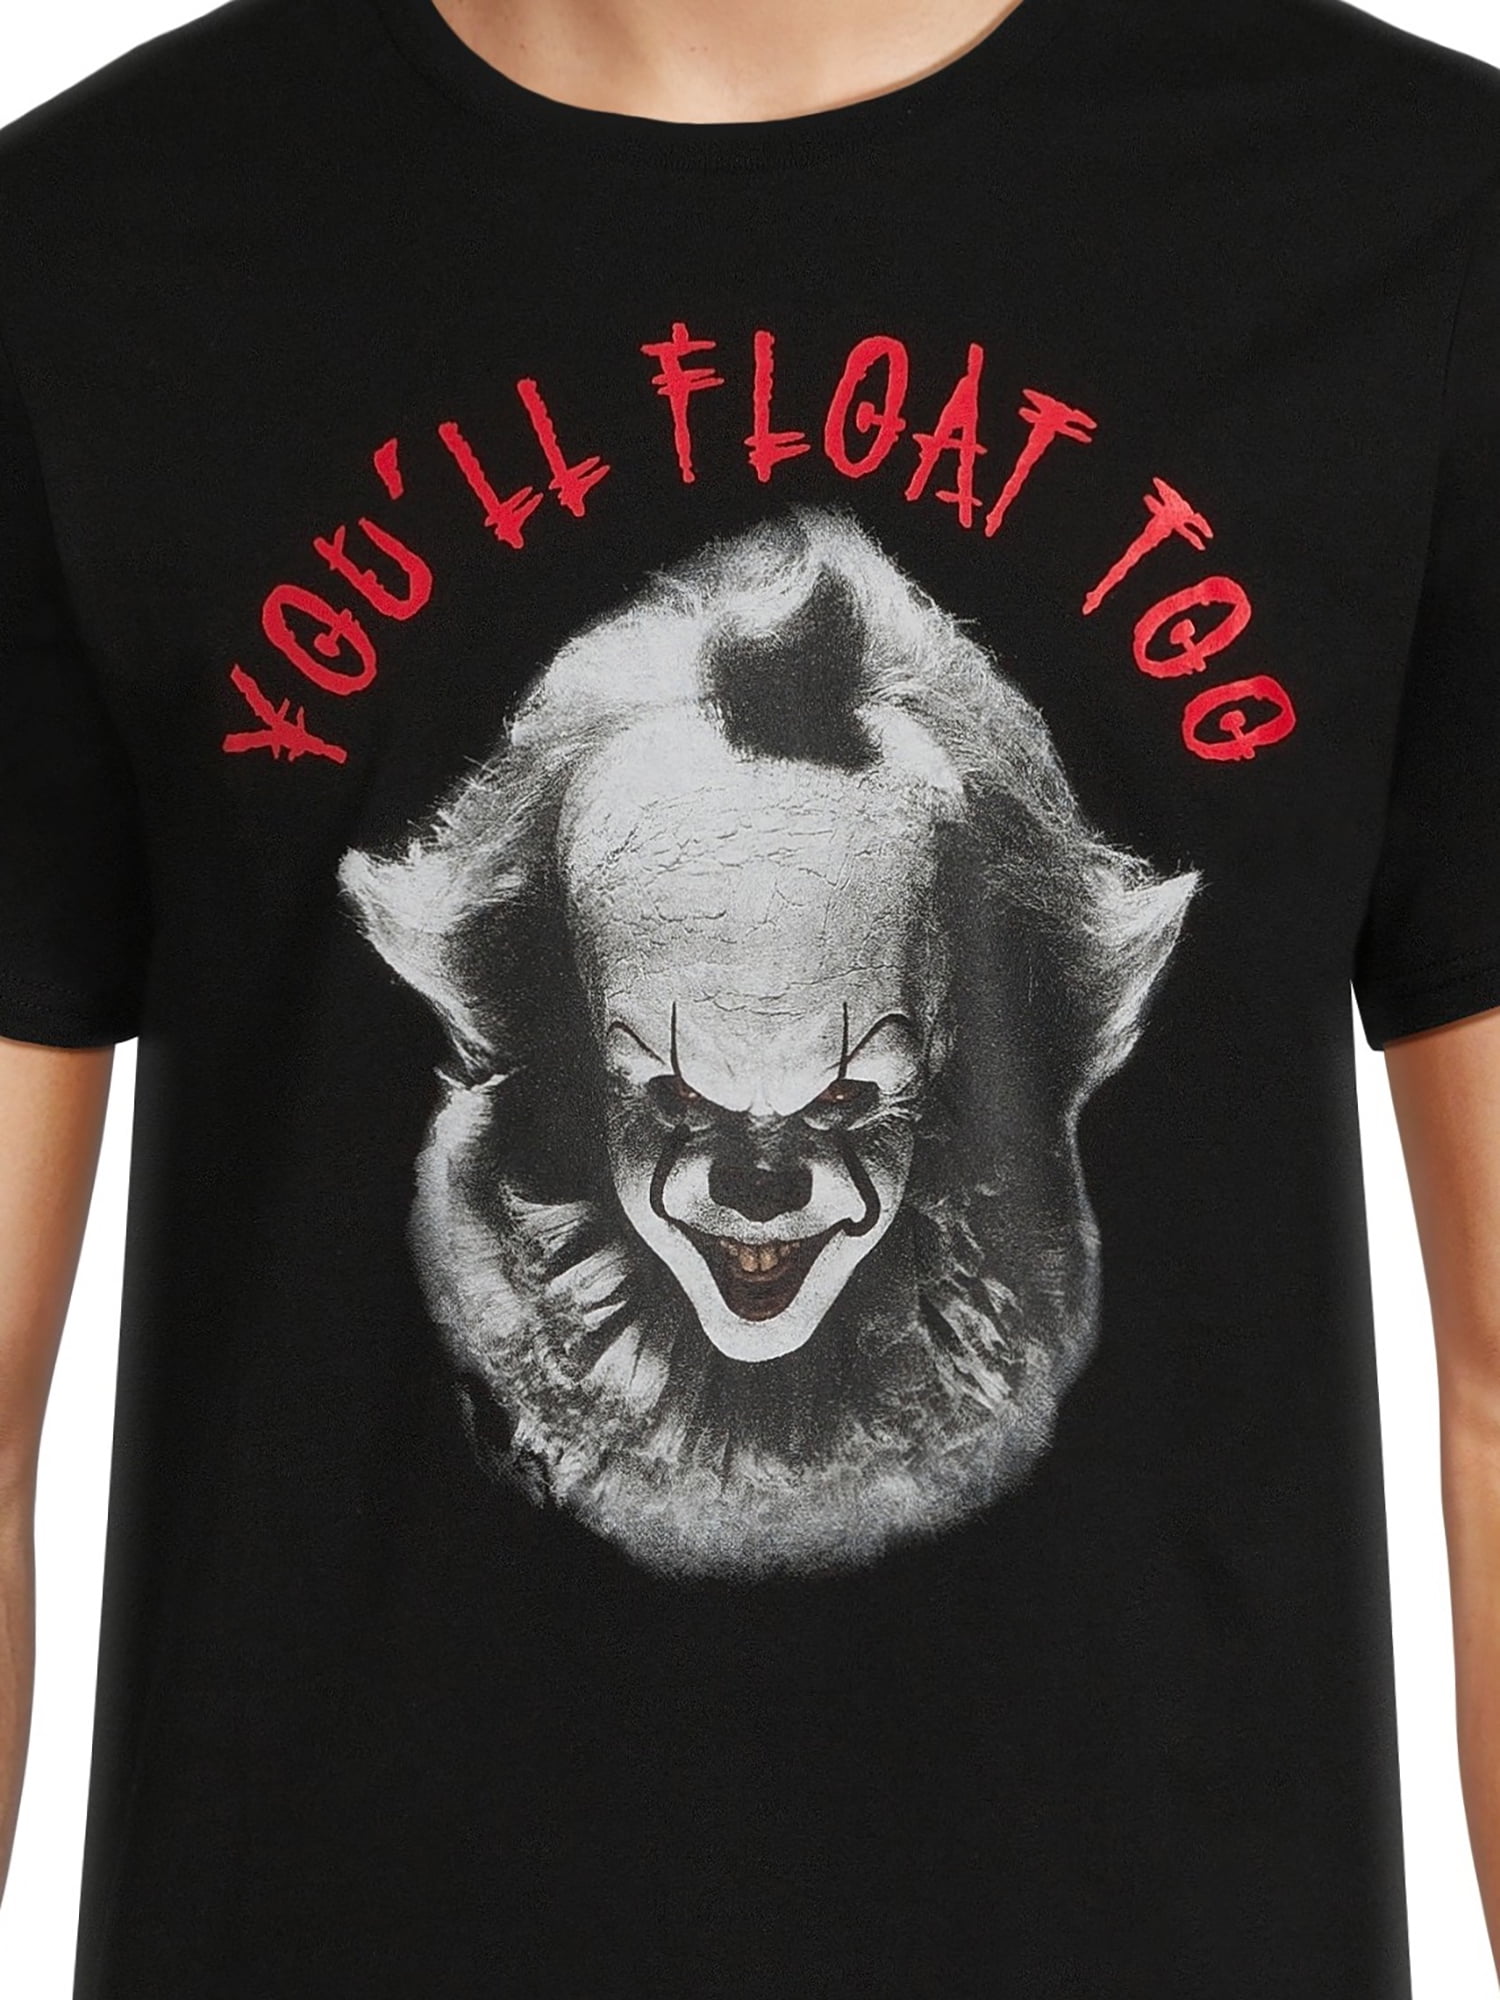 It and Clown Stephen Men\'s S-3XL King Big Sizes Men\'s Graphic Halloween 2-Pack, Pennywise Tees,